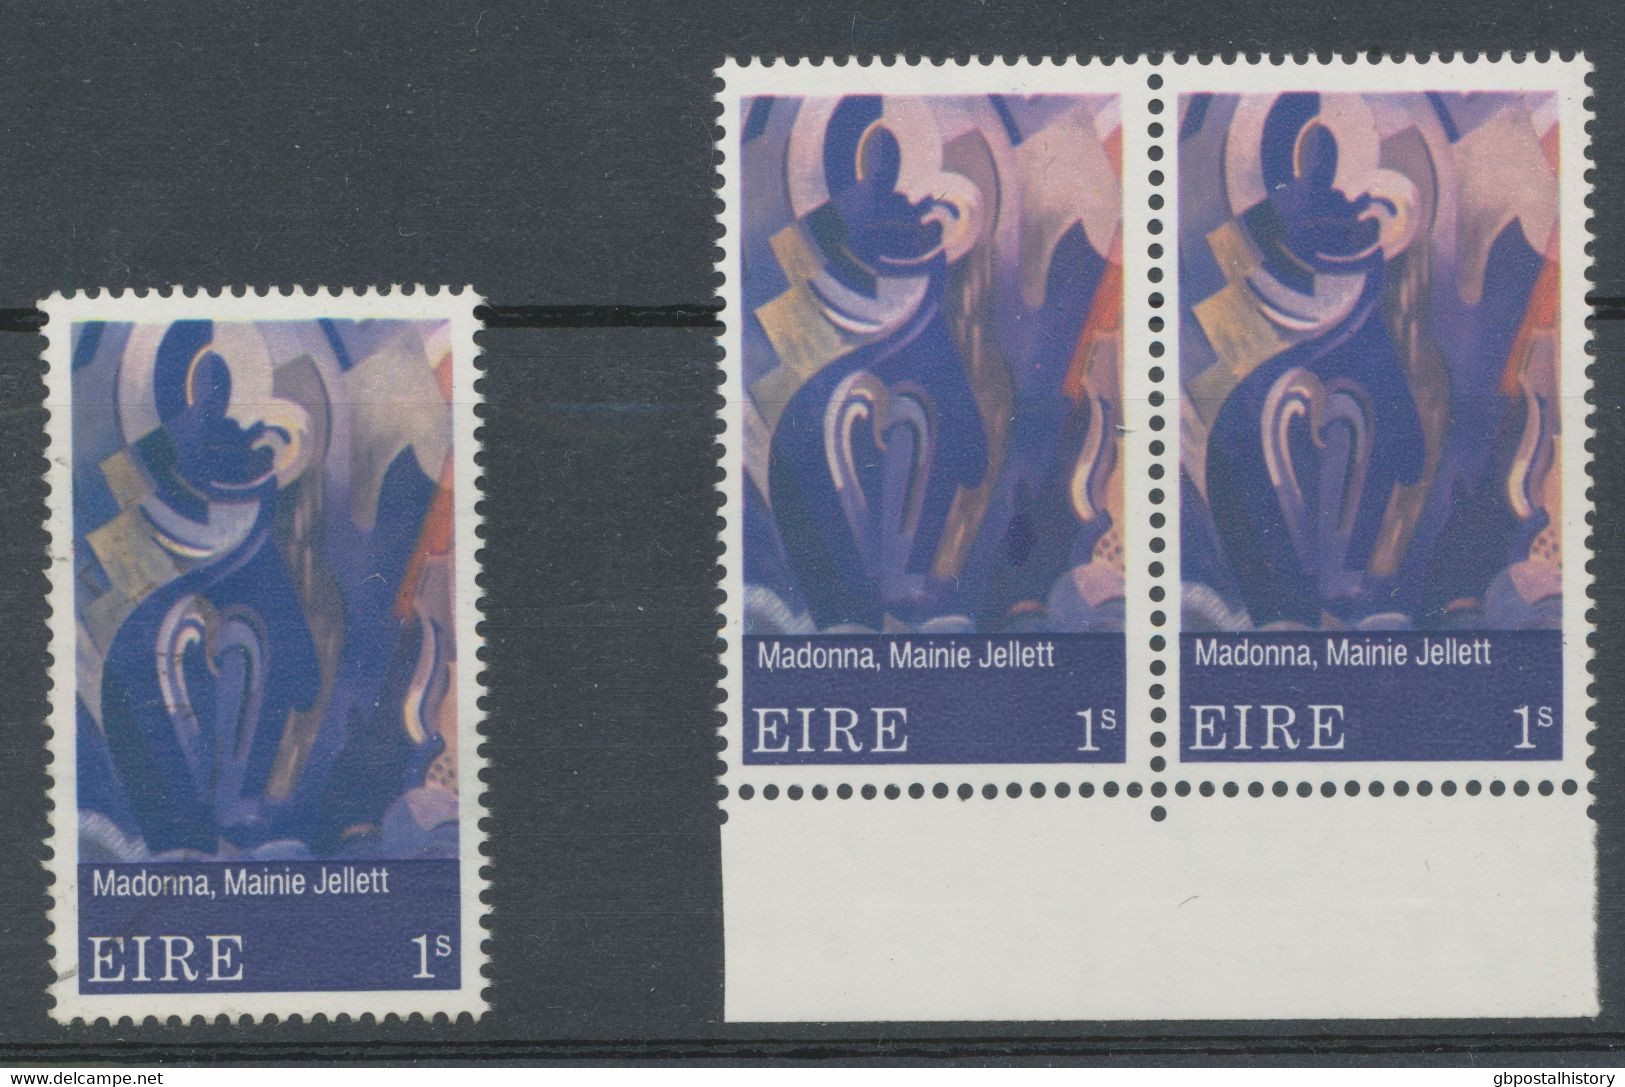 IRELAND 1970 Contemporary Irish Art 1S Superb Used MAJOR VARIETY COLOR PINK On The Left Stamp Is Almost Complete MISSING - Usados